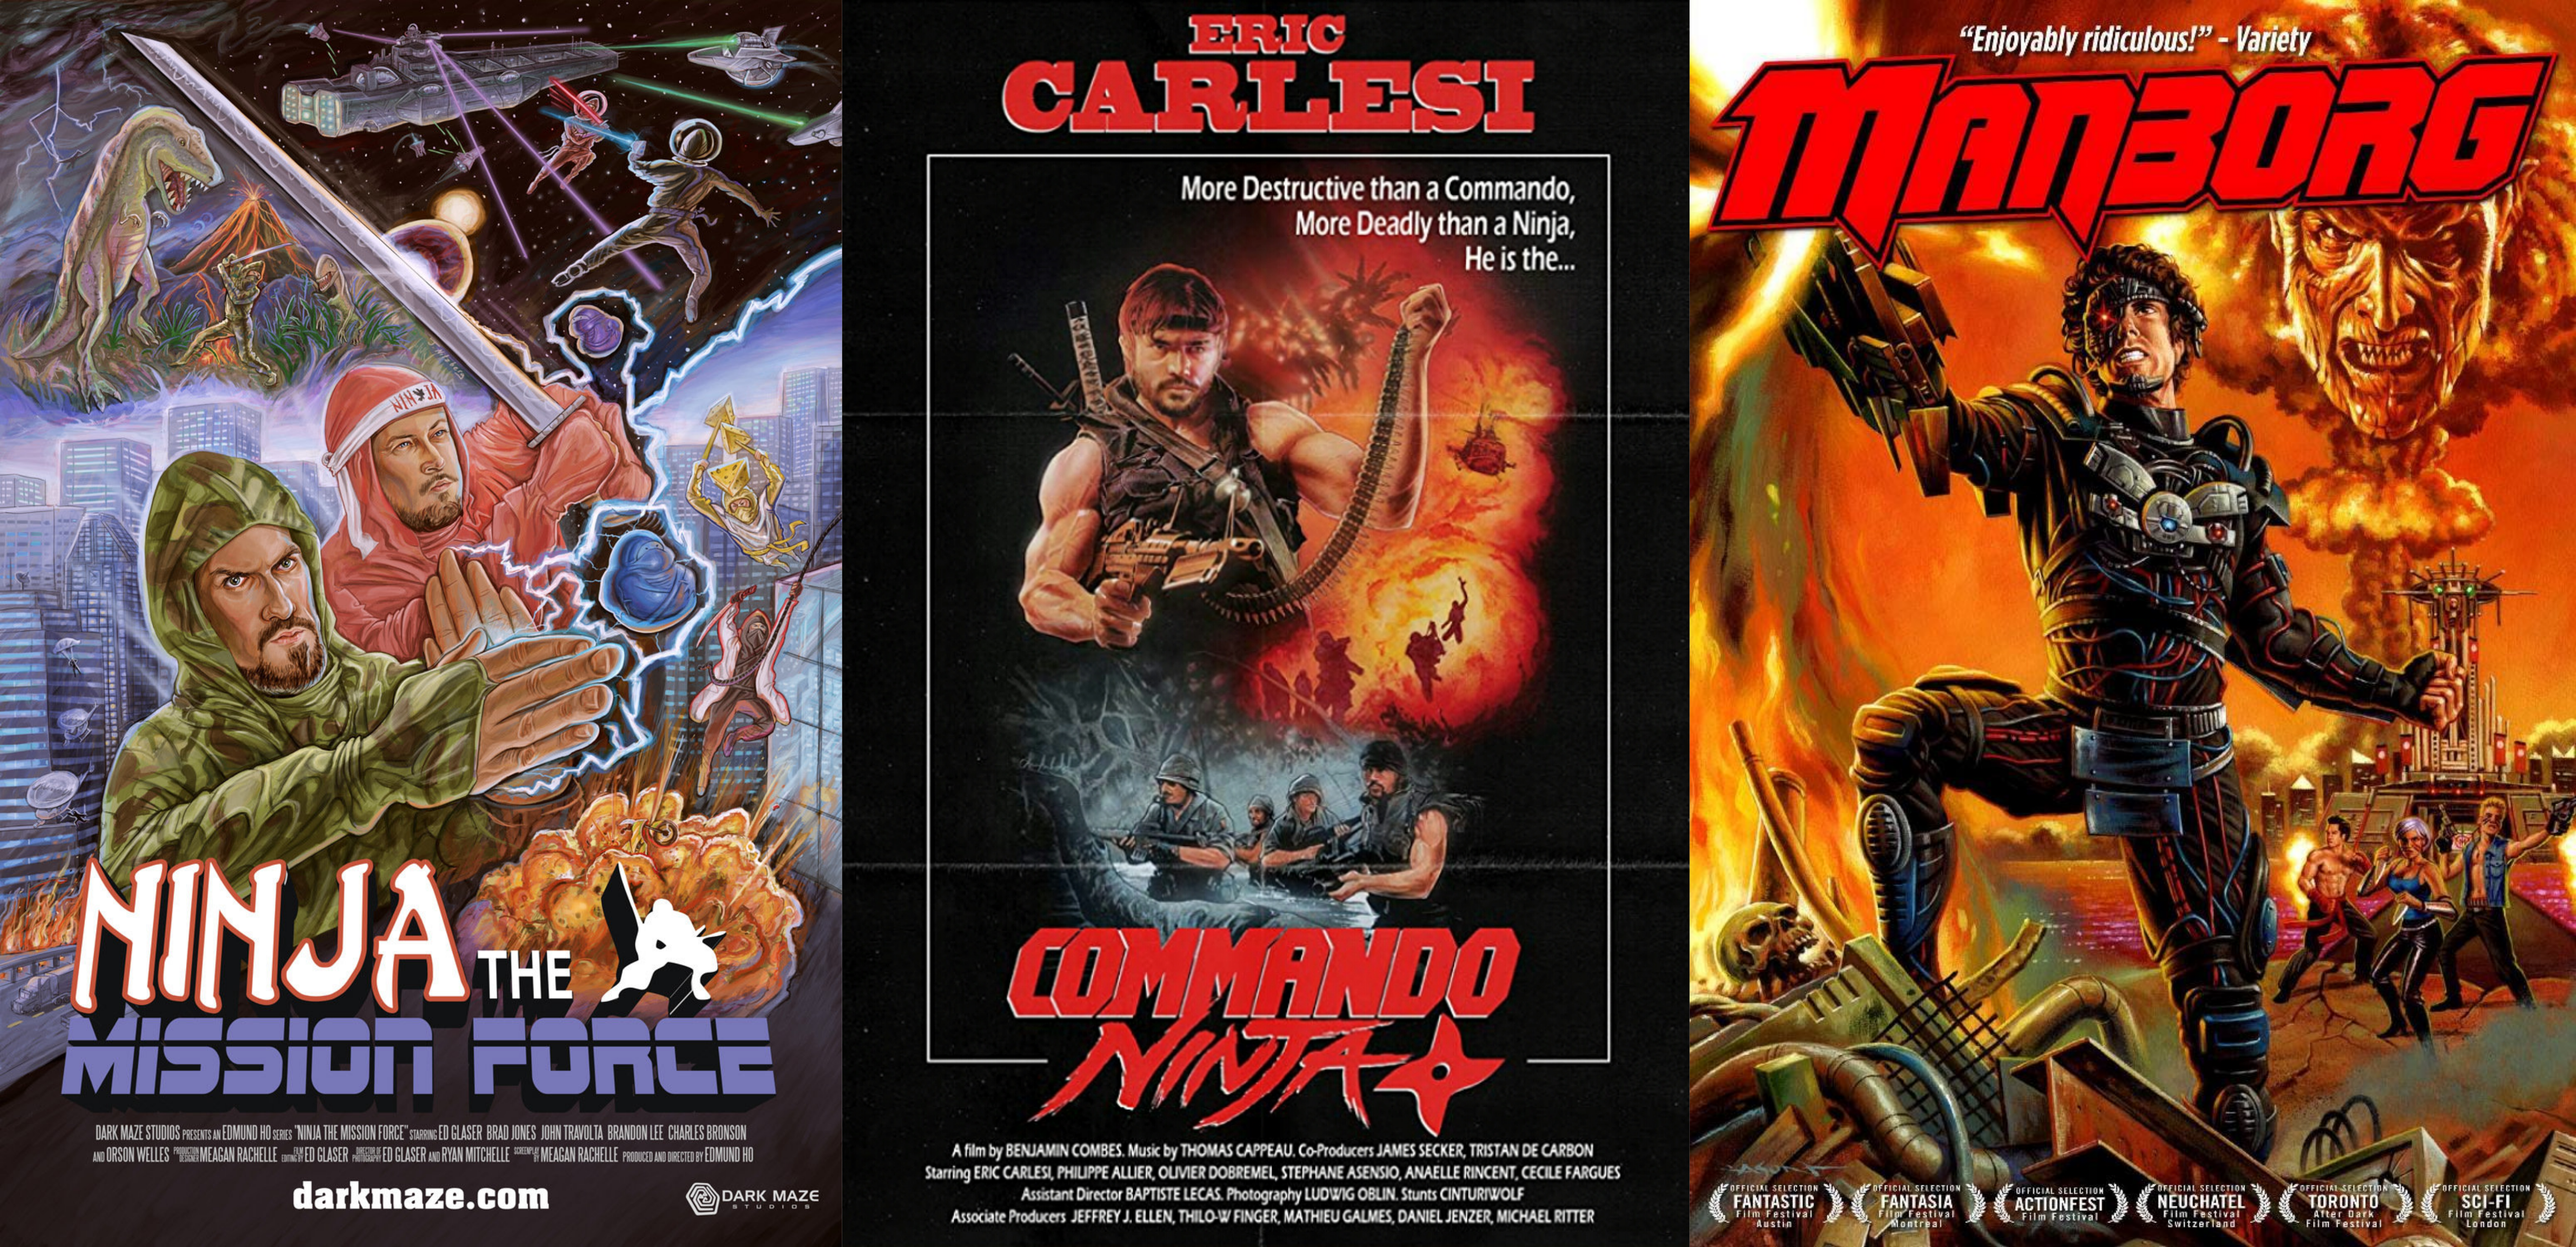 posters for Ninja: The Mission Force, Commando Ninja and Manborg combined.